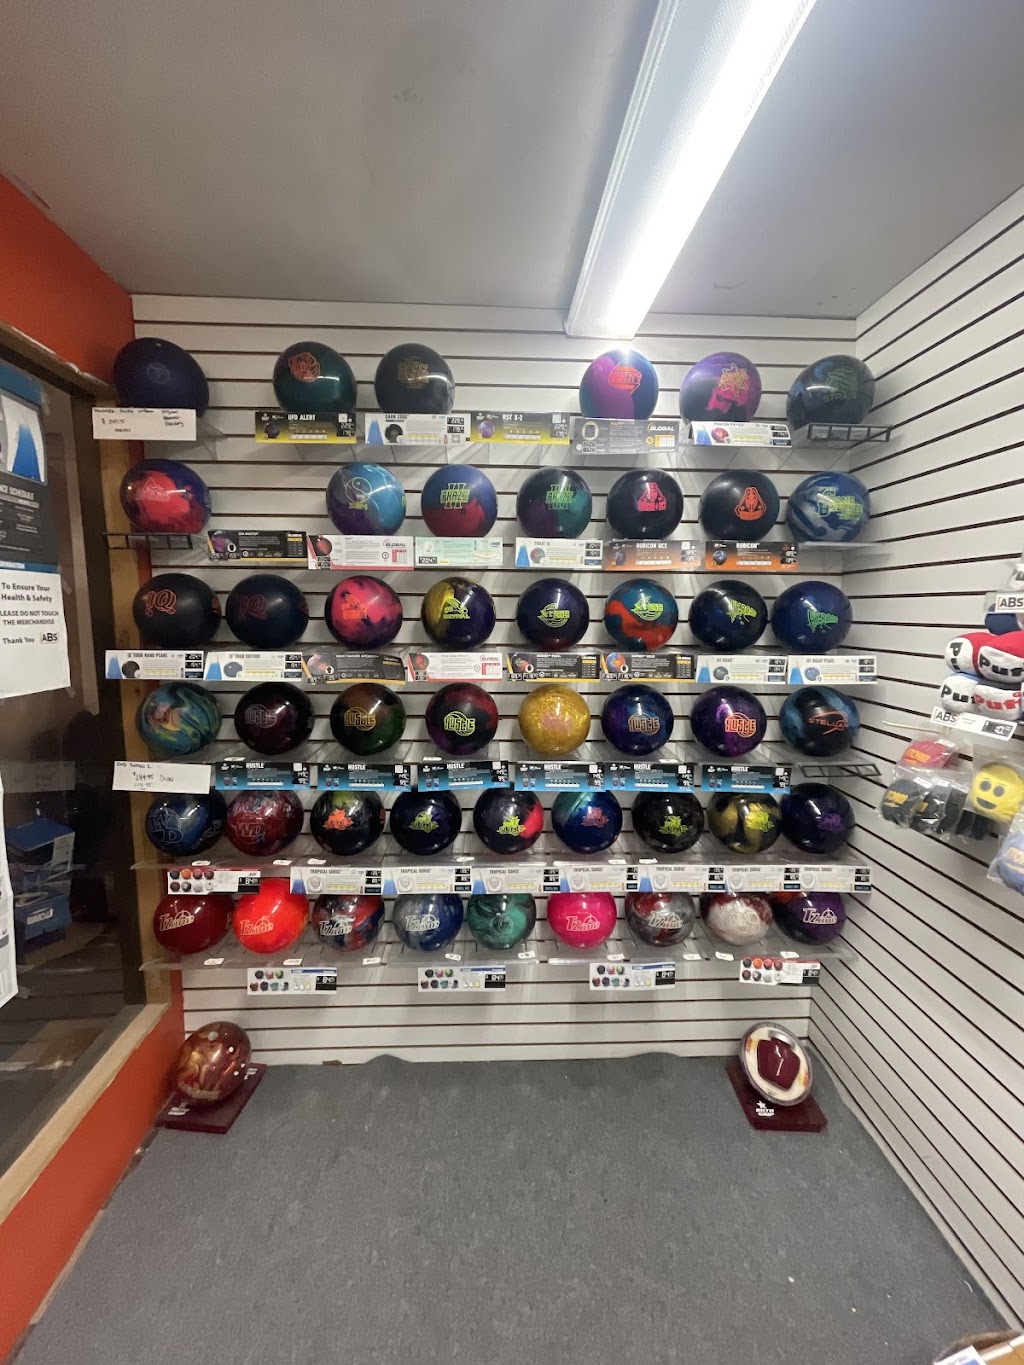 Action Bowling Supply | 1601 Altamont Ave, Schenectady, NY 12303, USA | Phone: (518) 355-3939